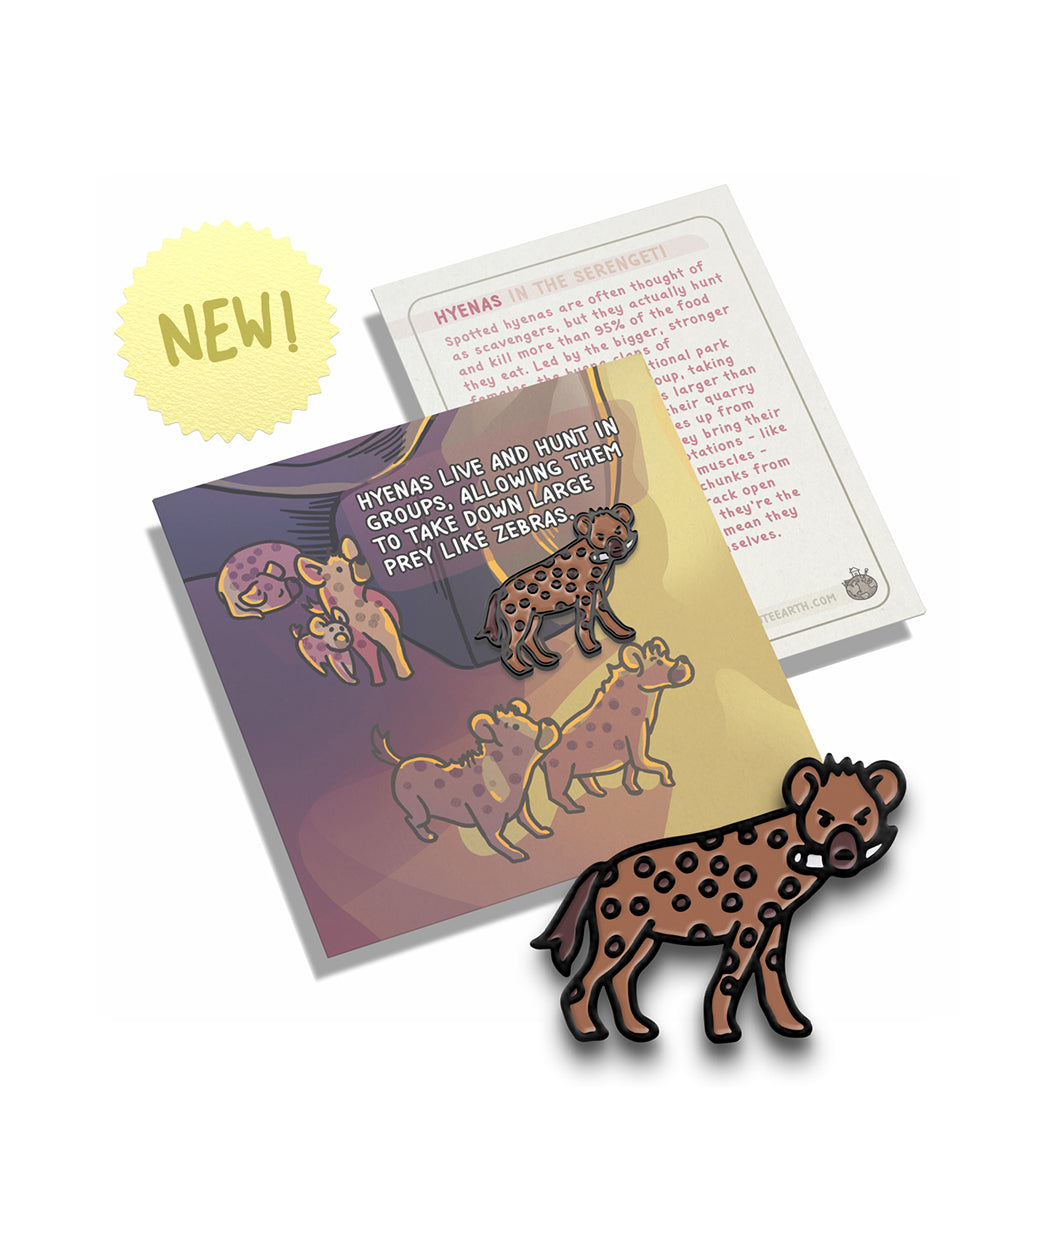 A hyena pin on a pin backing that gives facts about the hyena.